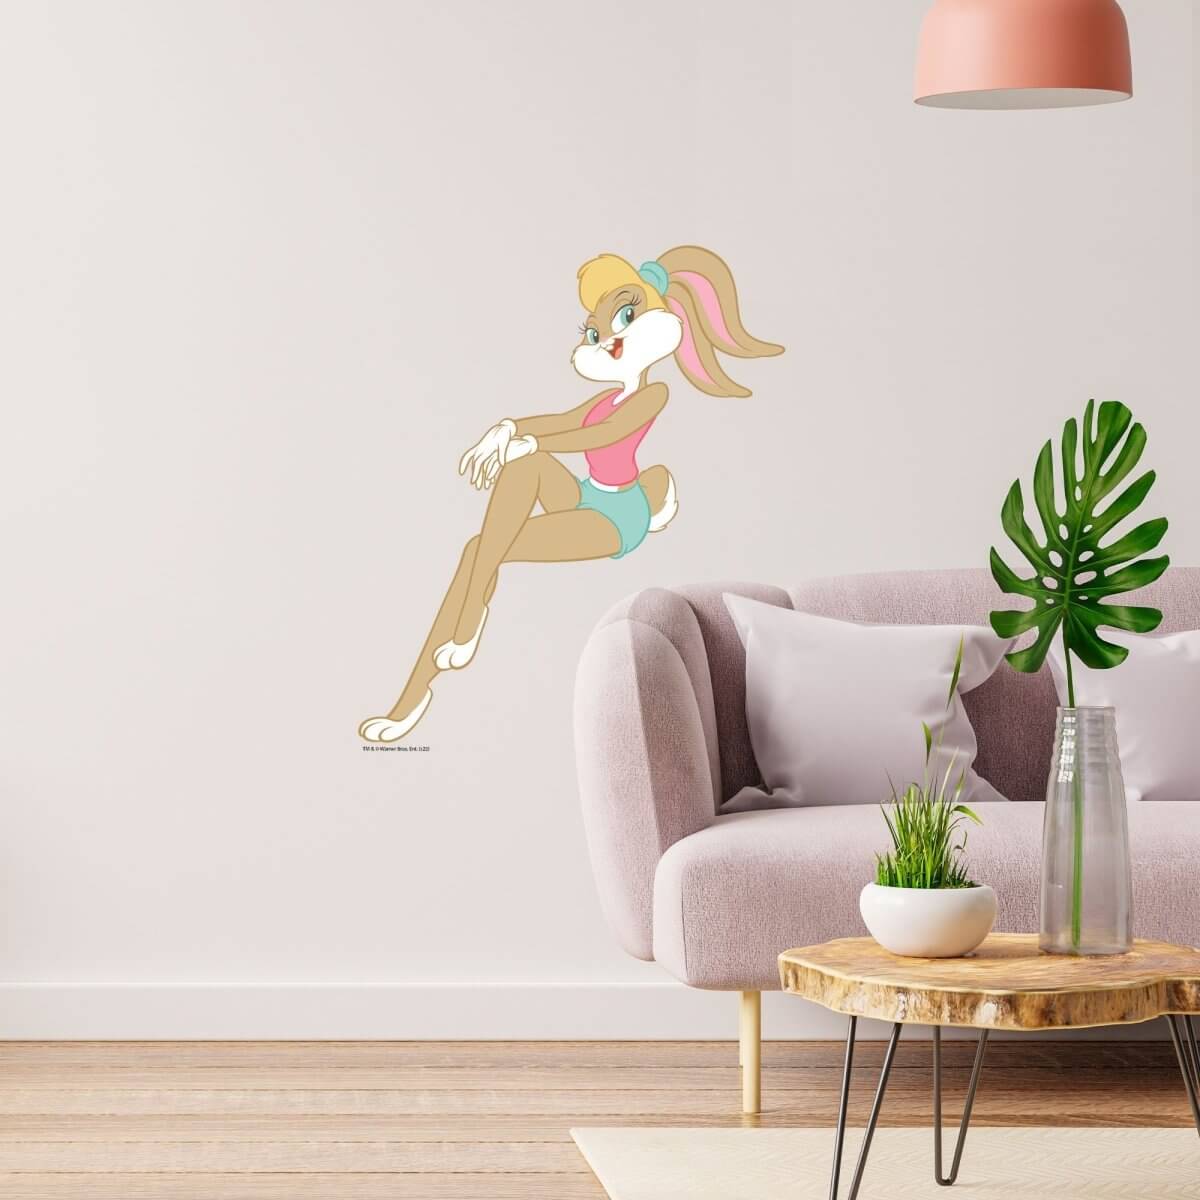 Kismet Decals Looney Tunes Lola Bunny Pose Licensed Wall Sticker - Easy DIY Home & Kids Room Decor Wall Decal Art - Kismet Decals